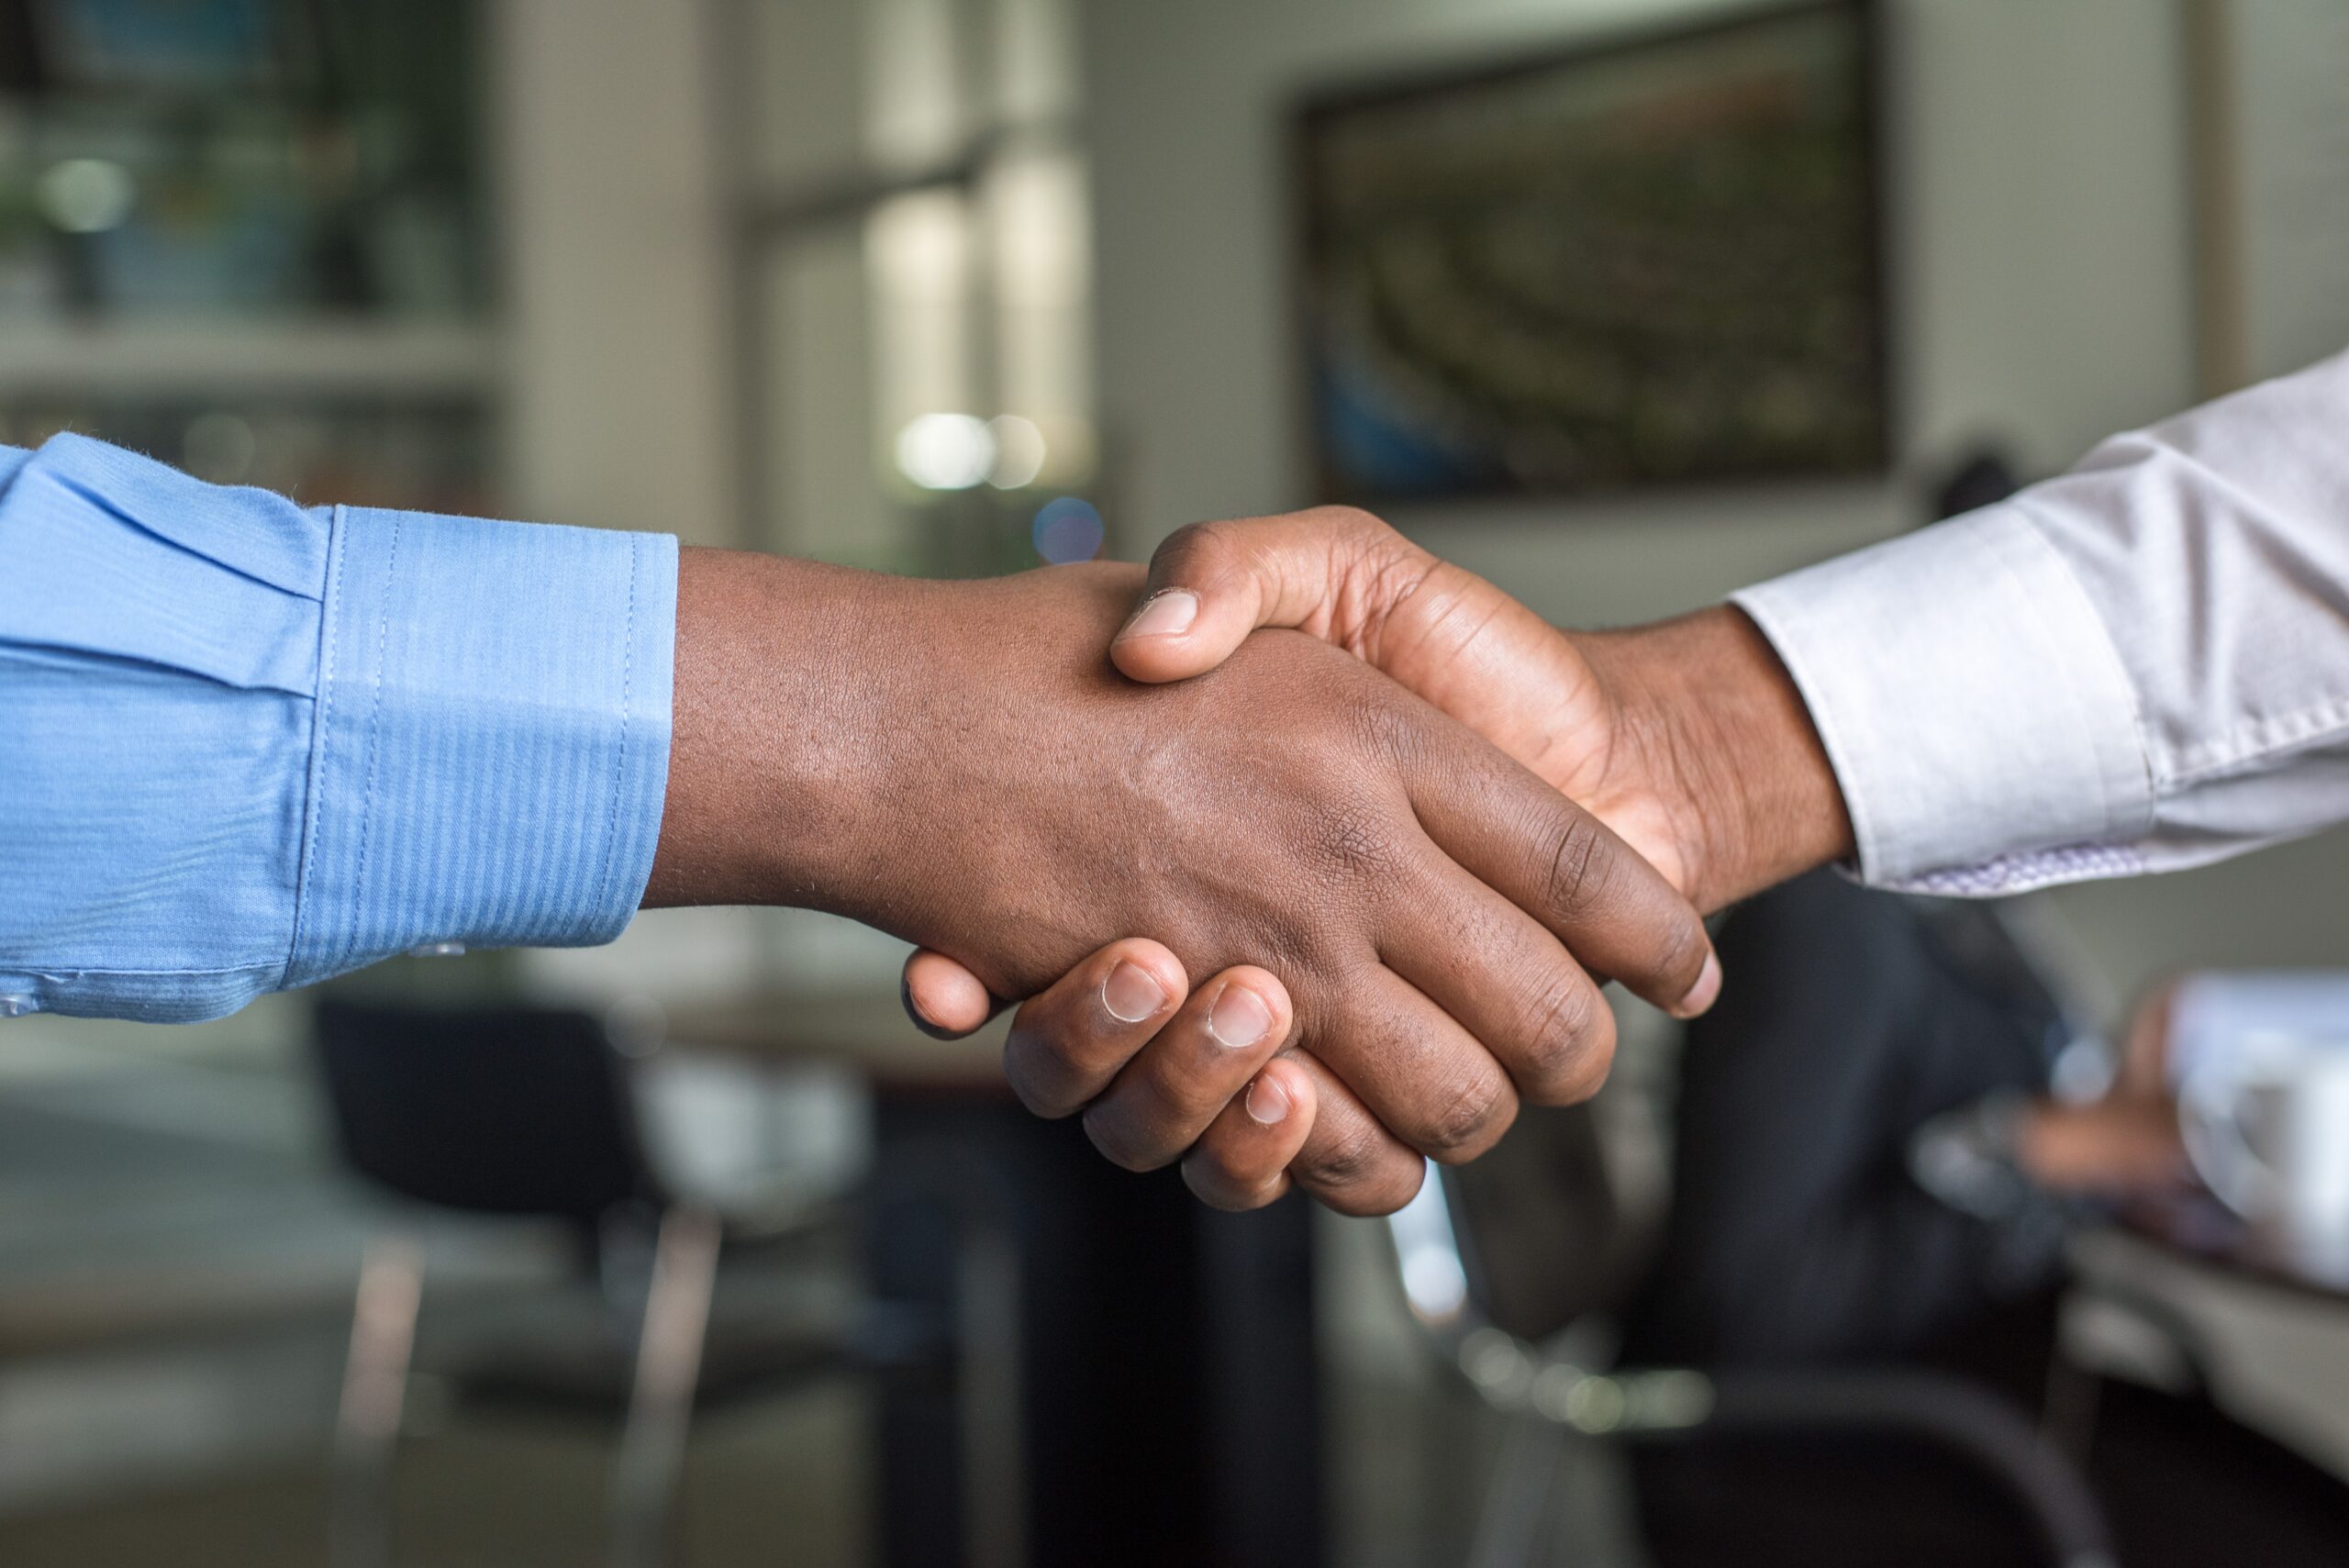 Two people shaking hands in an office setting, with focus on their hands and a blurred background featuring chairs and tables, signify the crucial role of trust between executors.